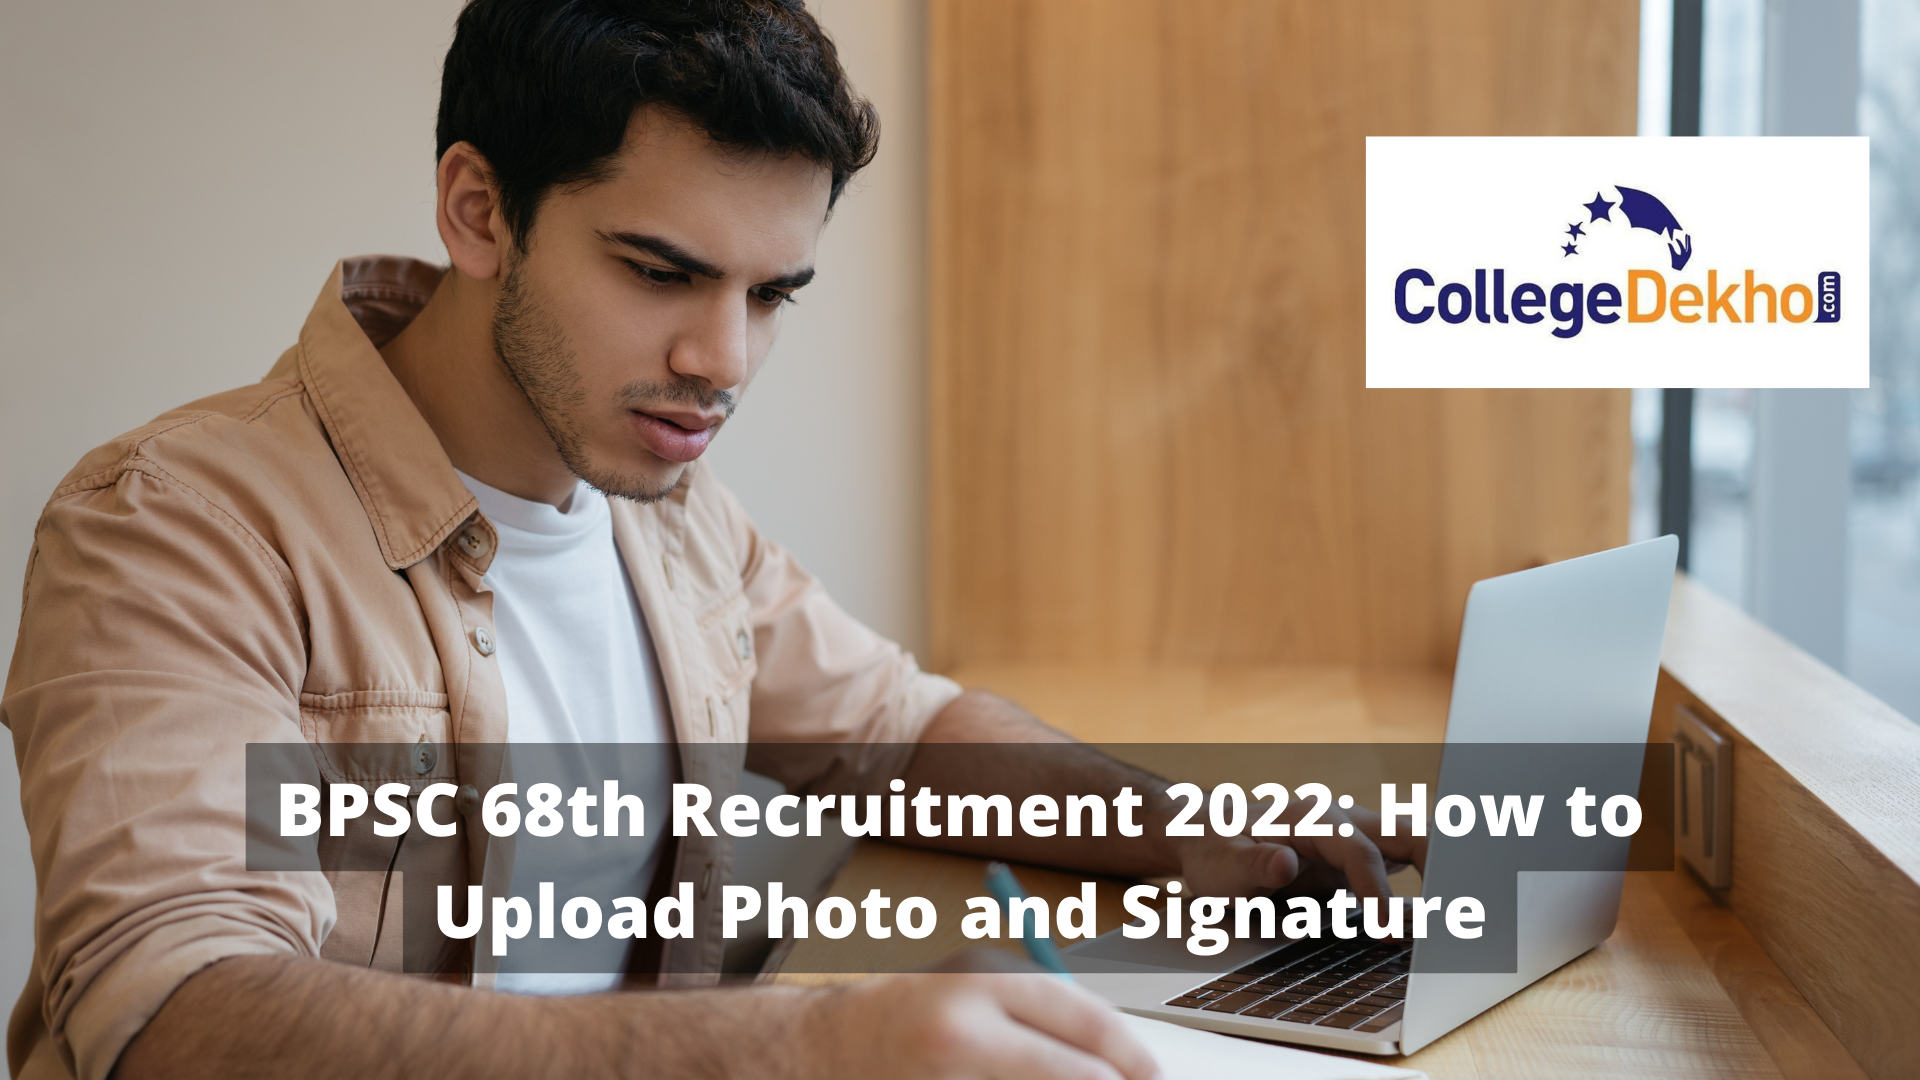 BPSC 68th Recruitment 2022: How to Upload Photo and Signature